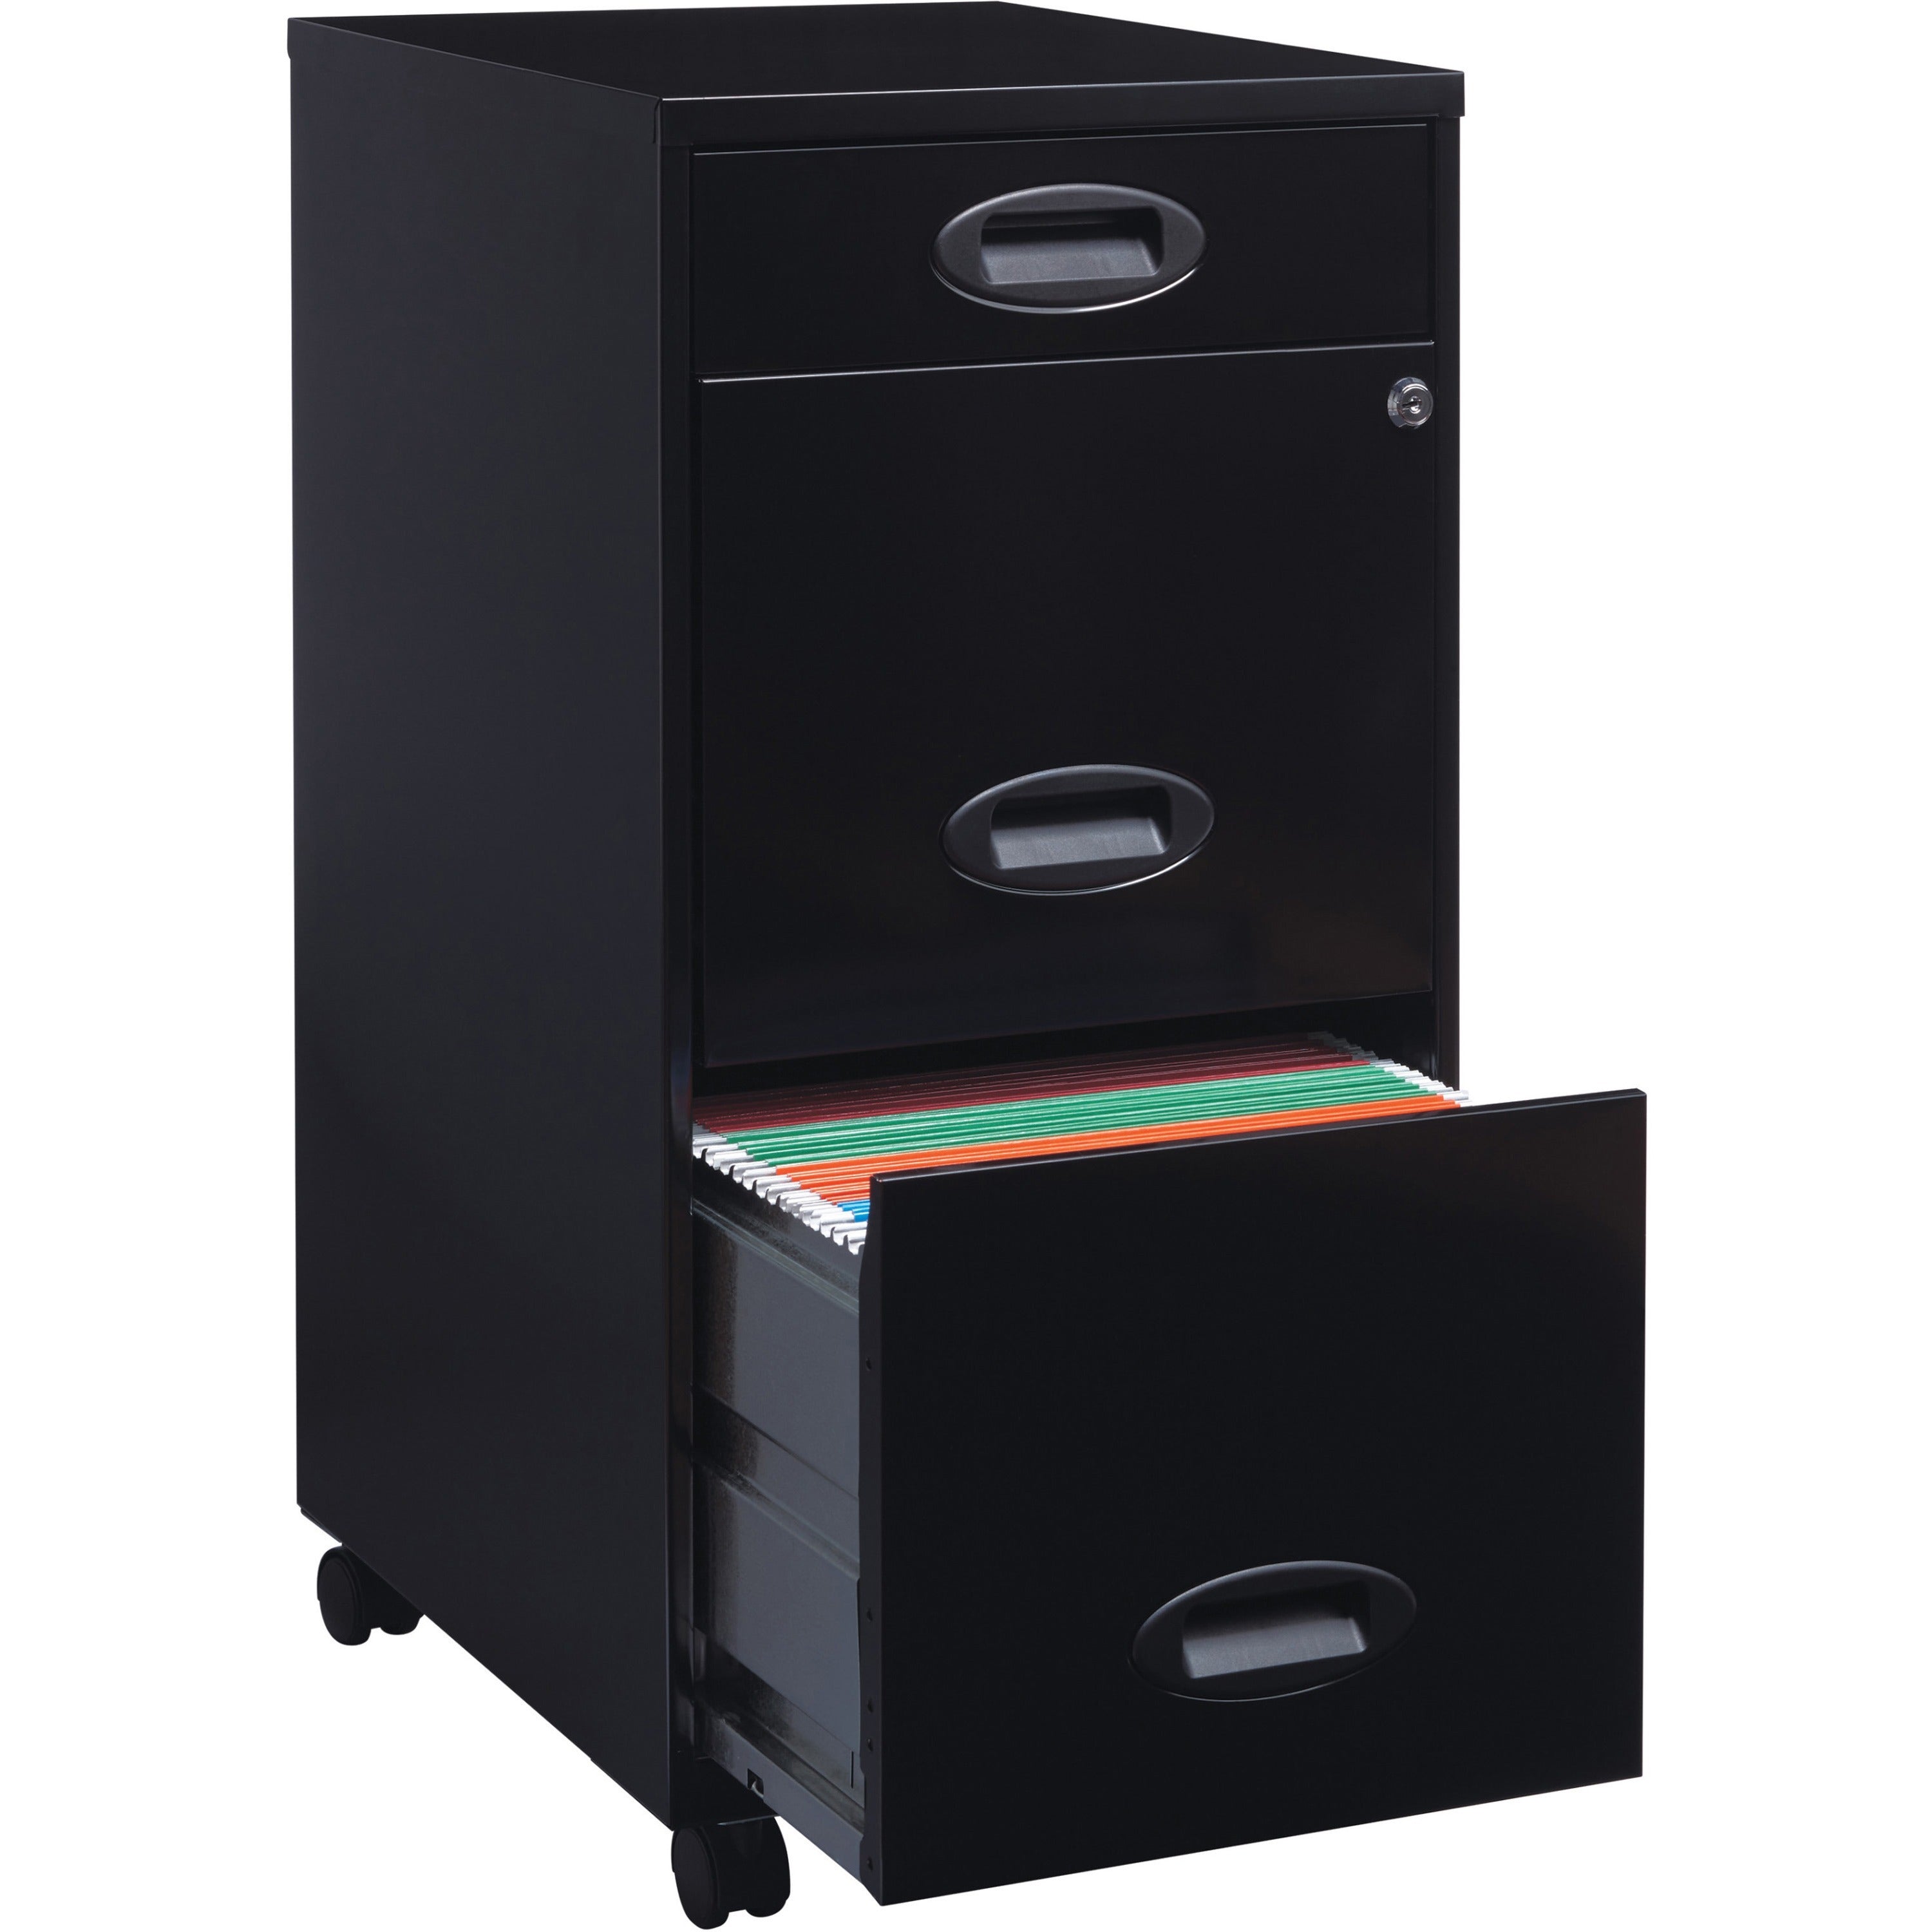 nusparc-file-cabinet-142-x-18-x-295-3-x-drawers-for-pencil-file-letter-vertical-mobility-glide-suspension-drawer-extension-anti-tip-lockable-wheels-nonporous-surface-black-painted-steel-recycled_nprvf318embk - 1